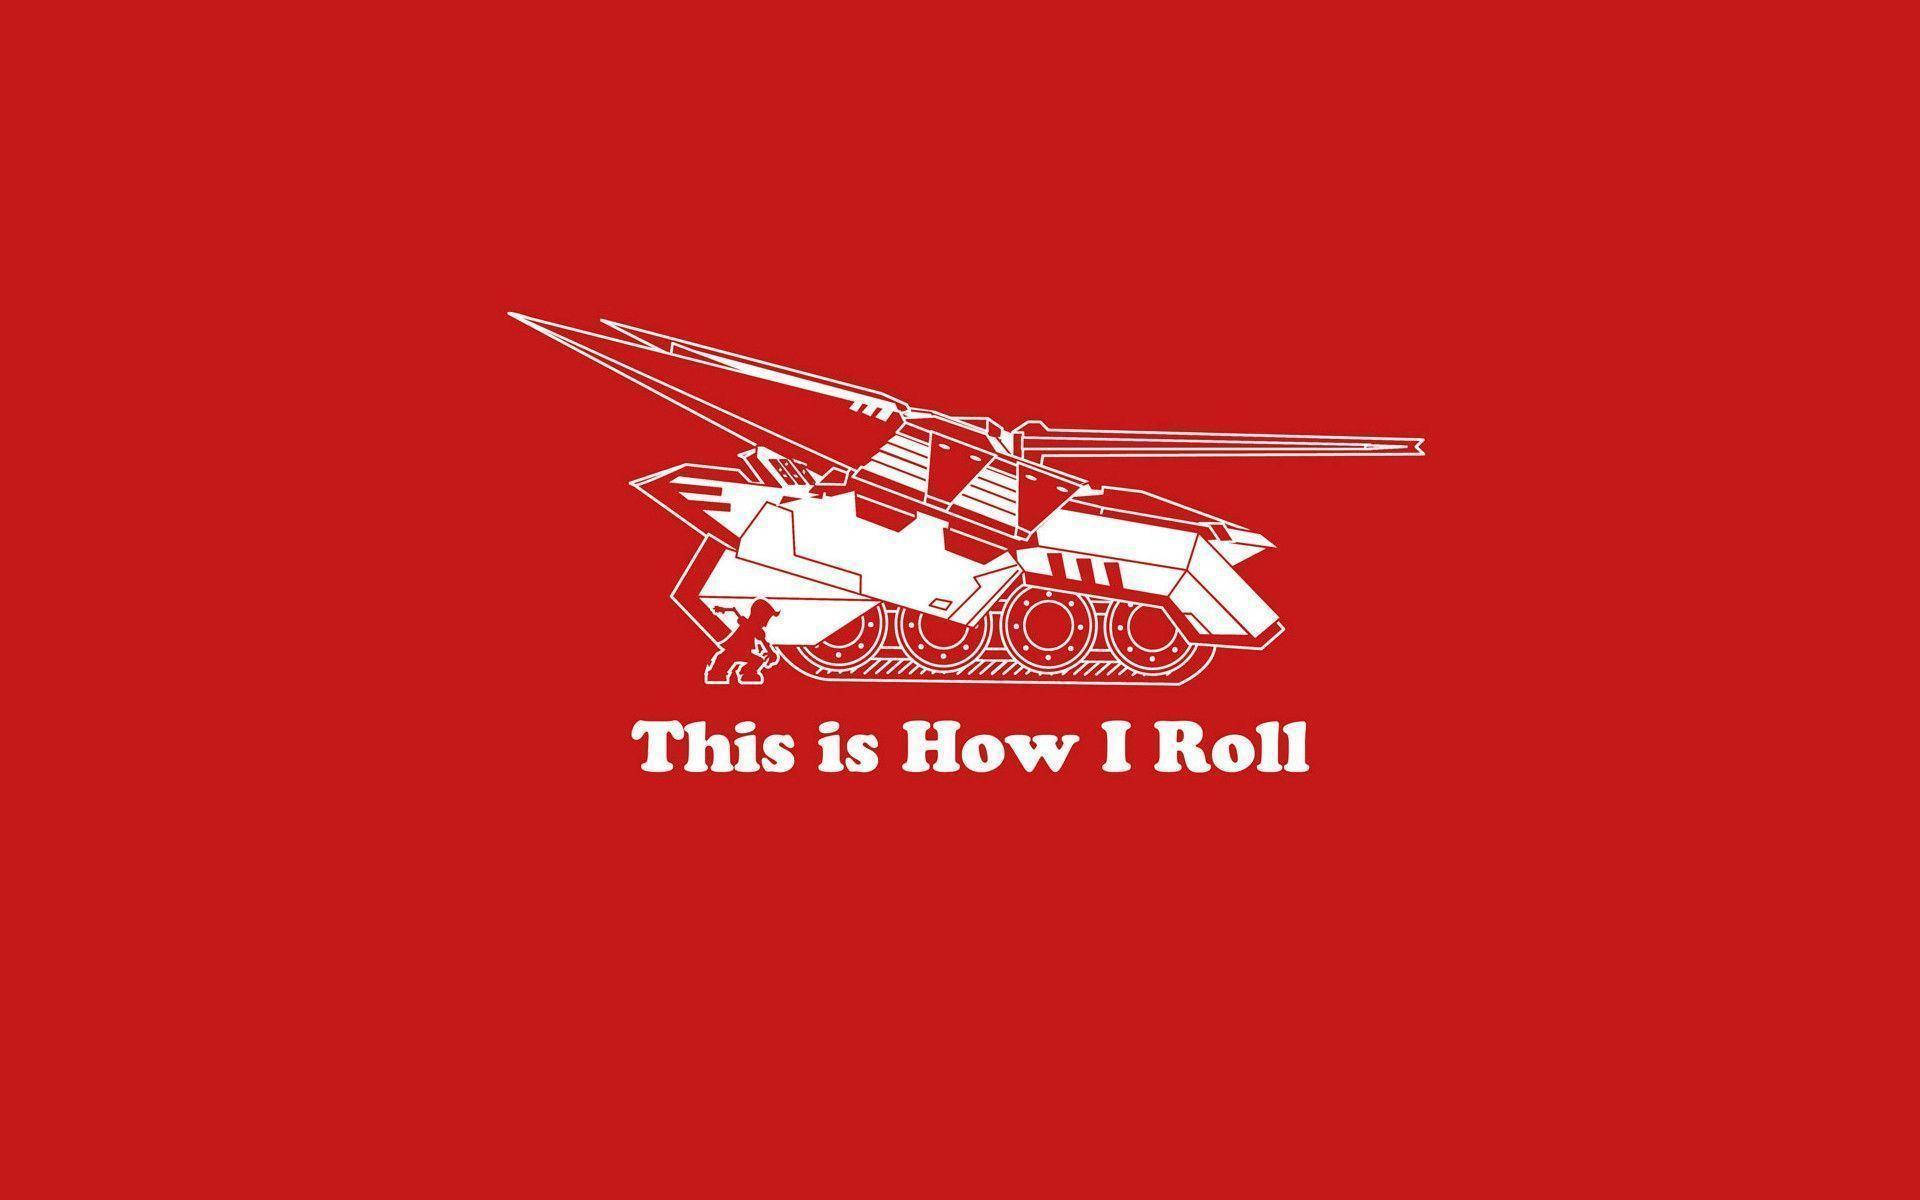 This Is How I Roll - So Rolle Ich! Wallpaper